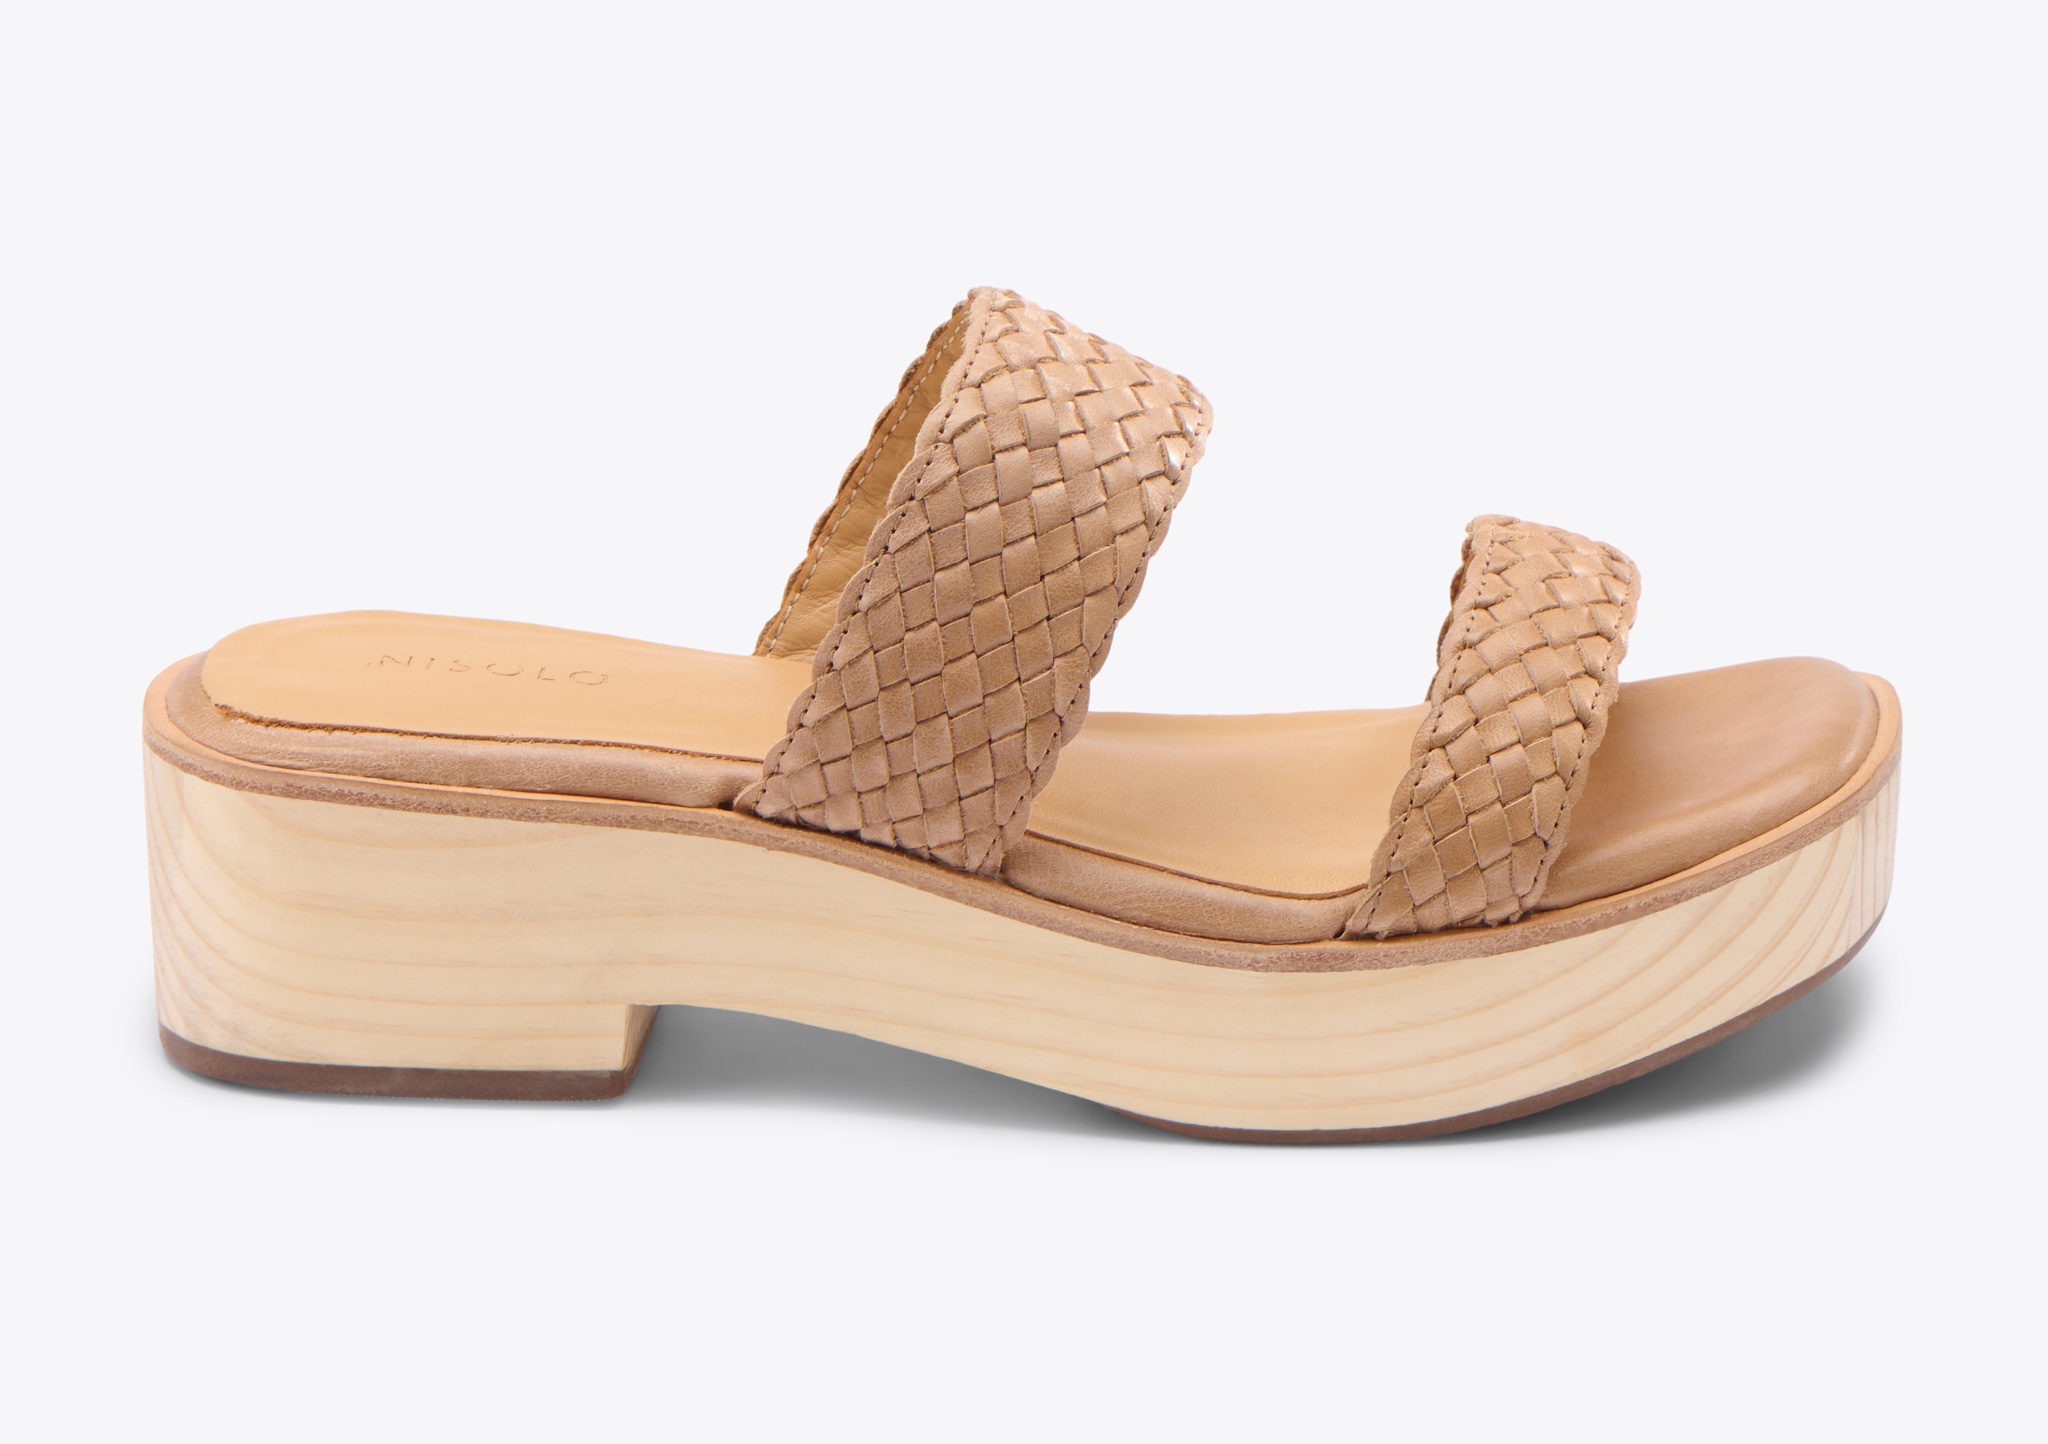 Nisolo Ellie All-Day Woven Clog Almond - Every Nisolo product is built on the foundation of comfort, function, and design. 